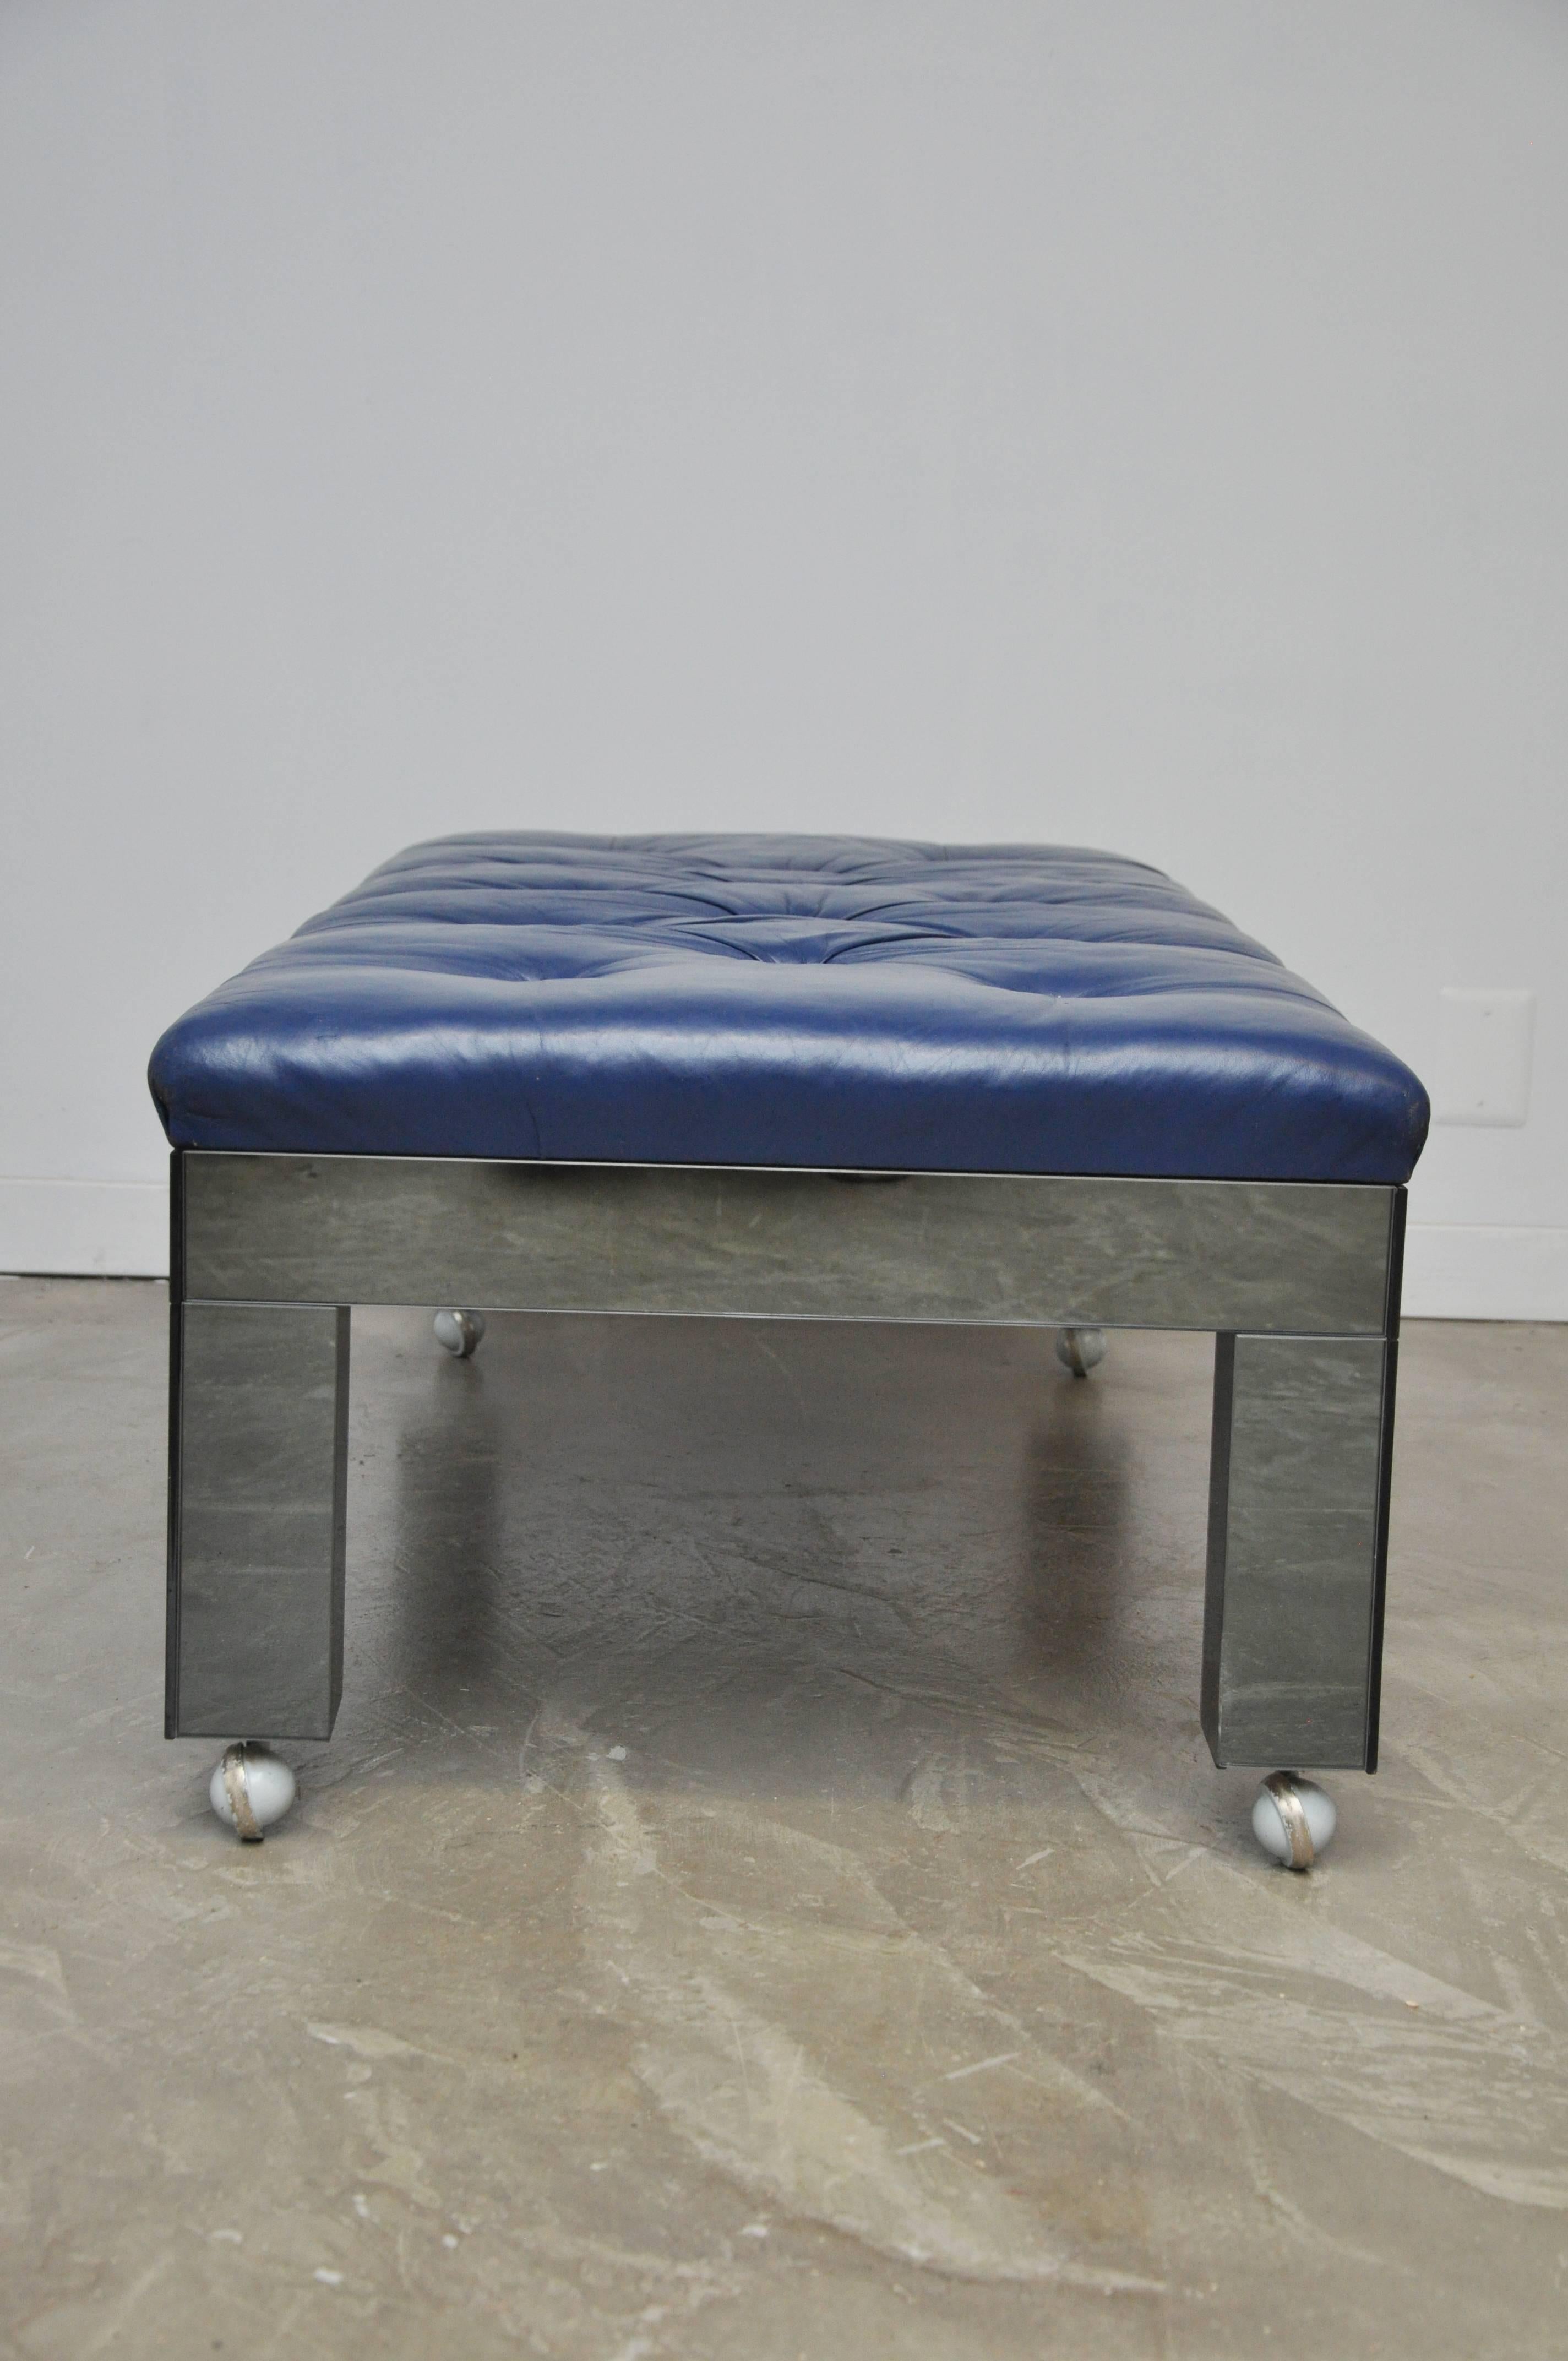 Beautiful mirror clad bench with original blue tufted leather. On castors for easy mobility, circa 1970s.